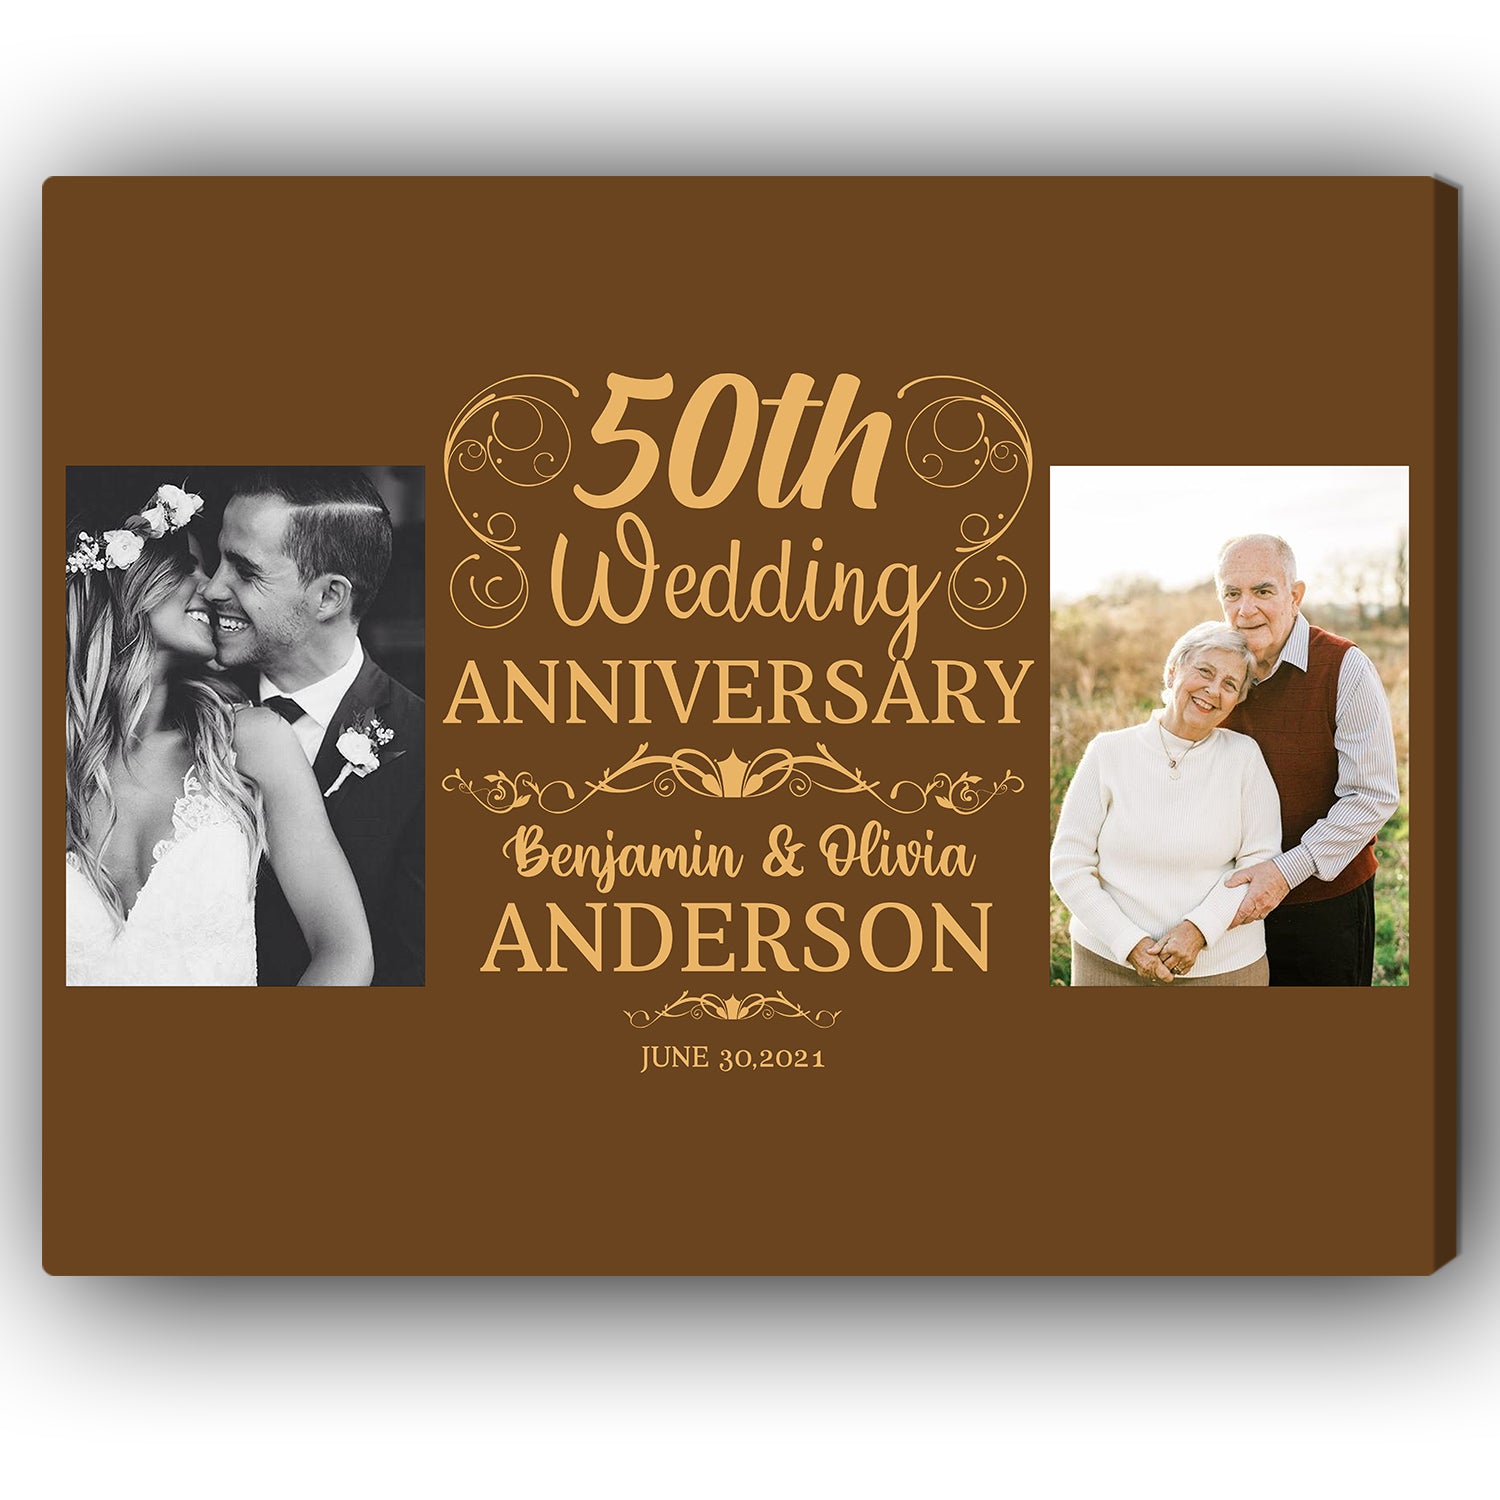 We Got This, Anniversary Gift, Personalized Christmas gifts for